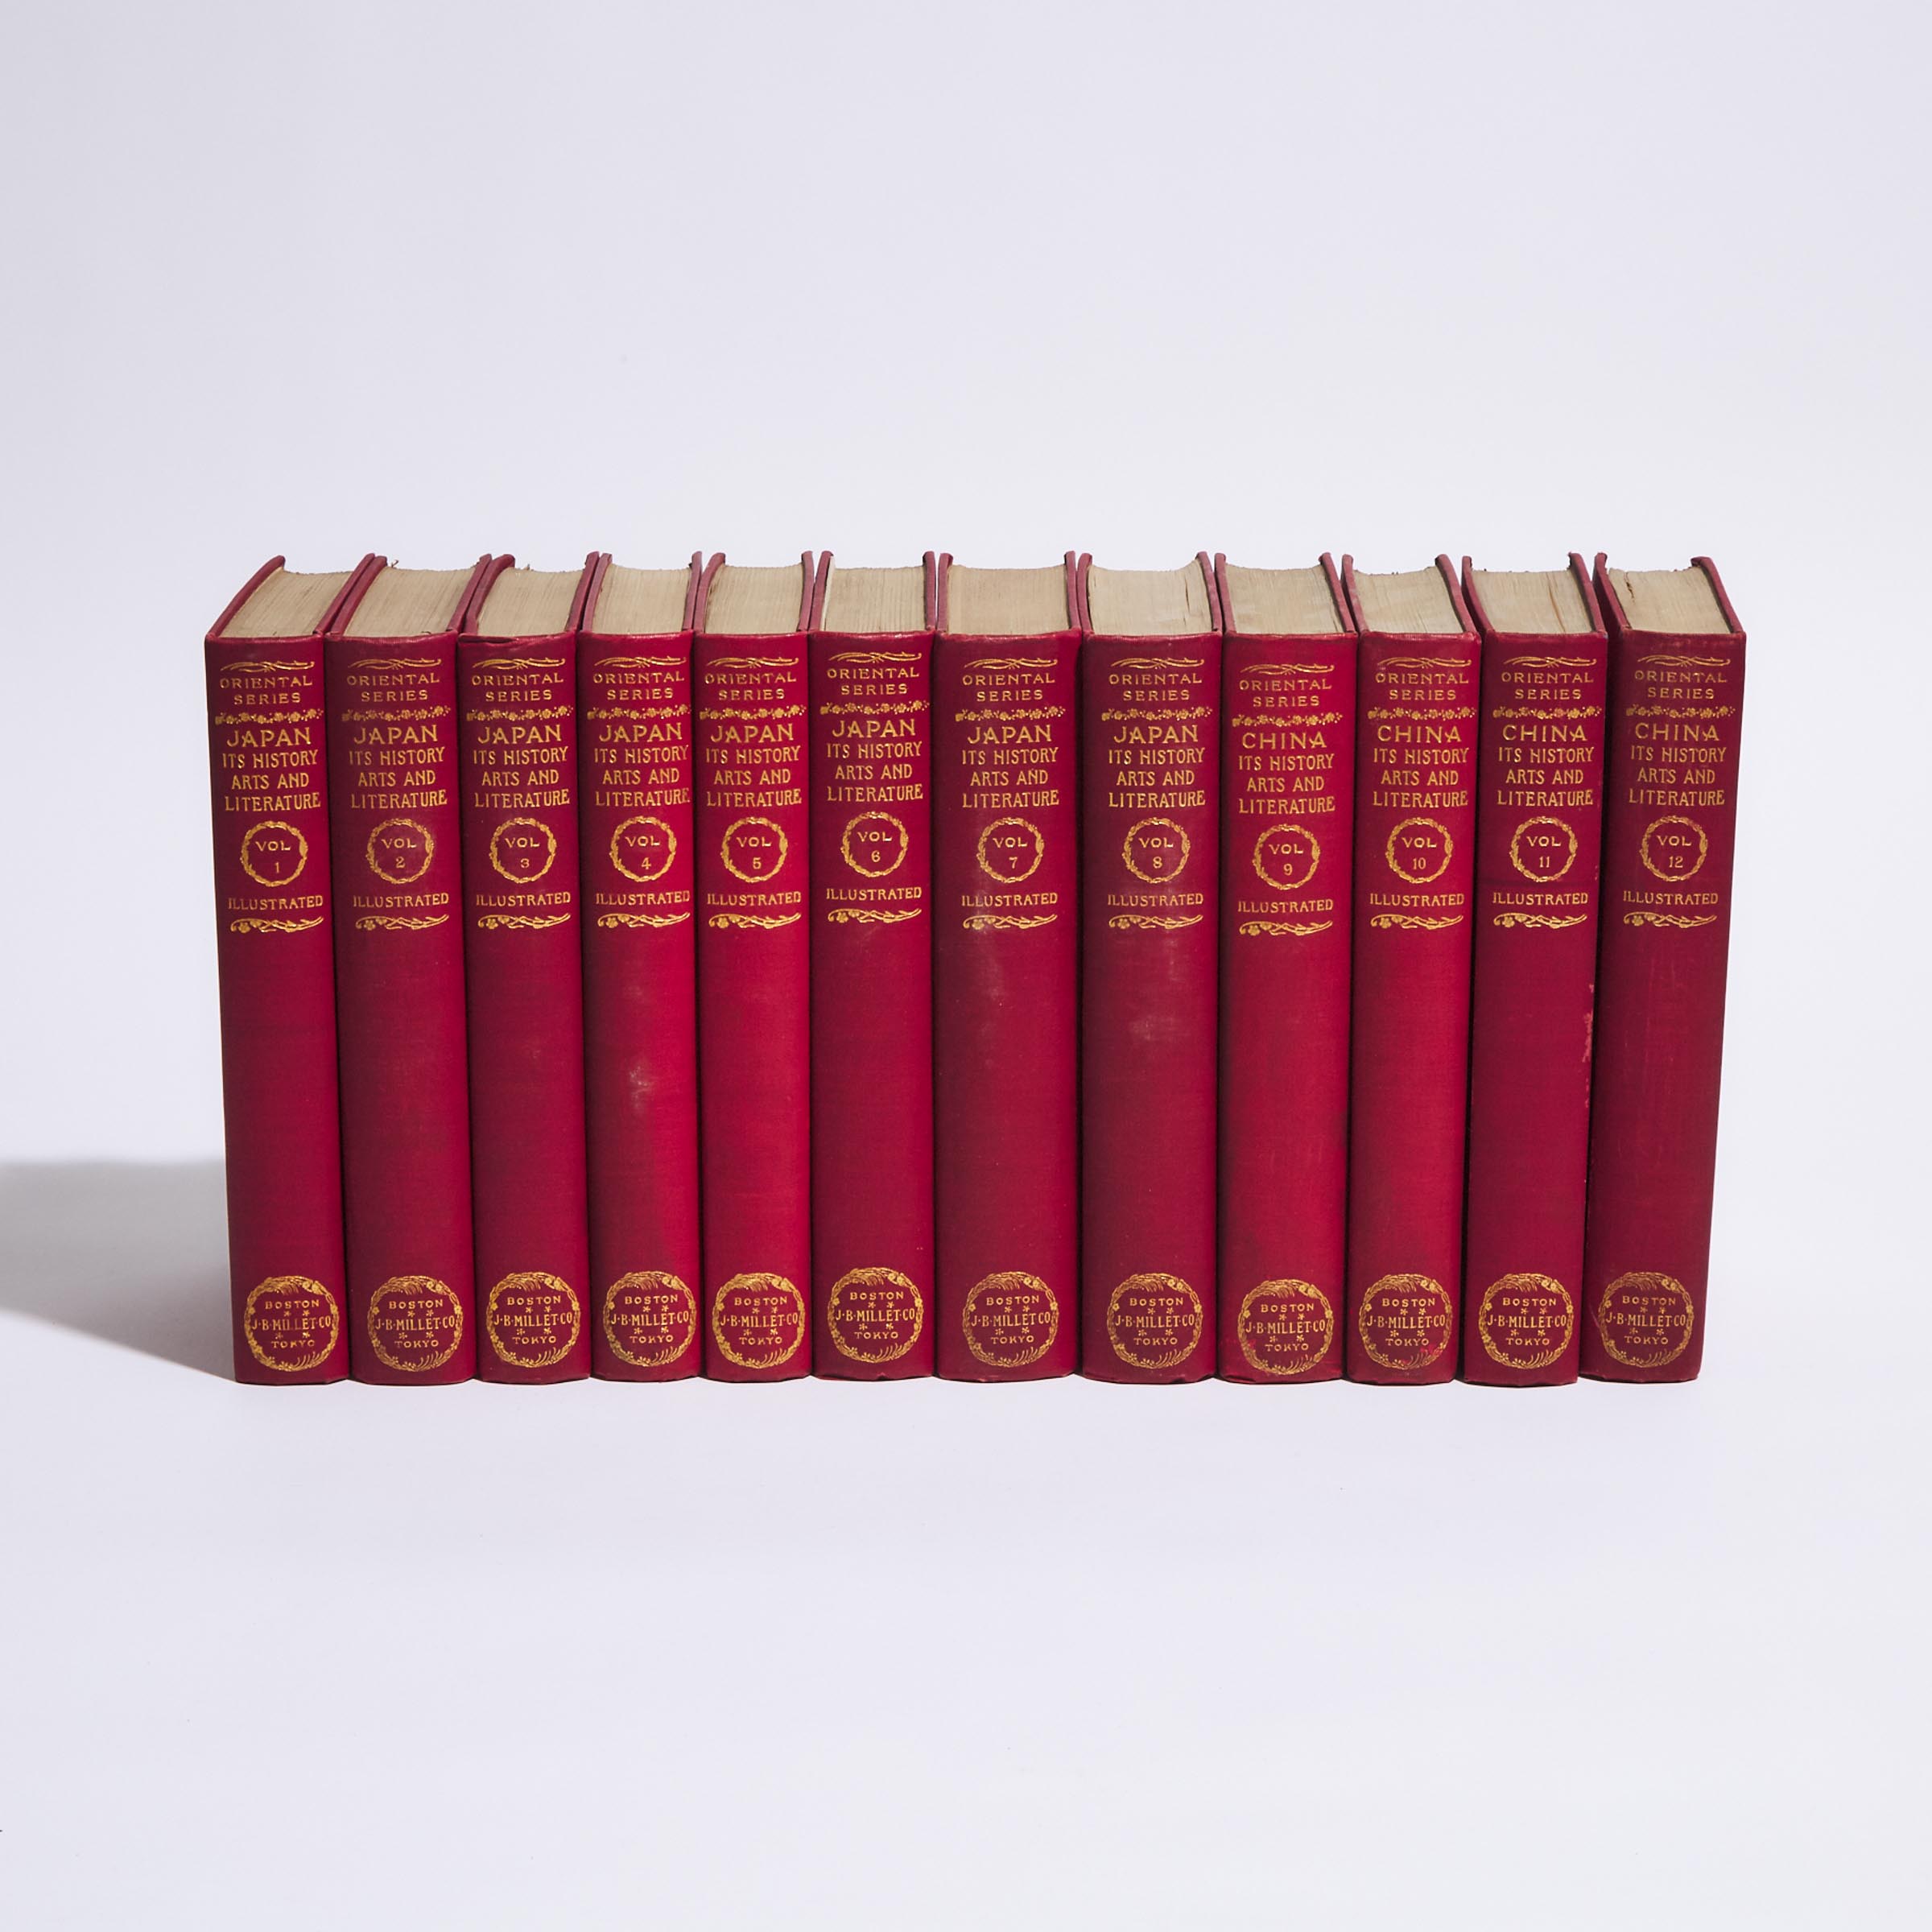 Captain F. Brinkley, A Set of Twelve Volumes of Japan and China: Its History, Arts and Literature, Author's Edition 26/1000, 1902